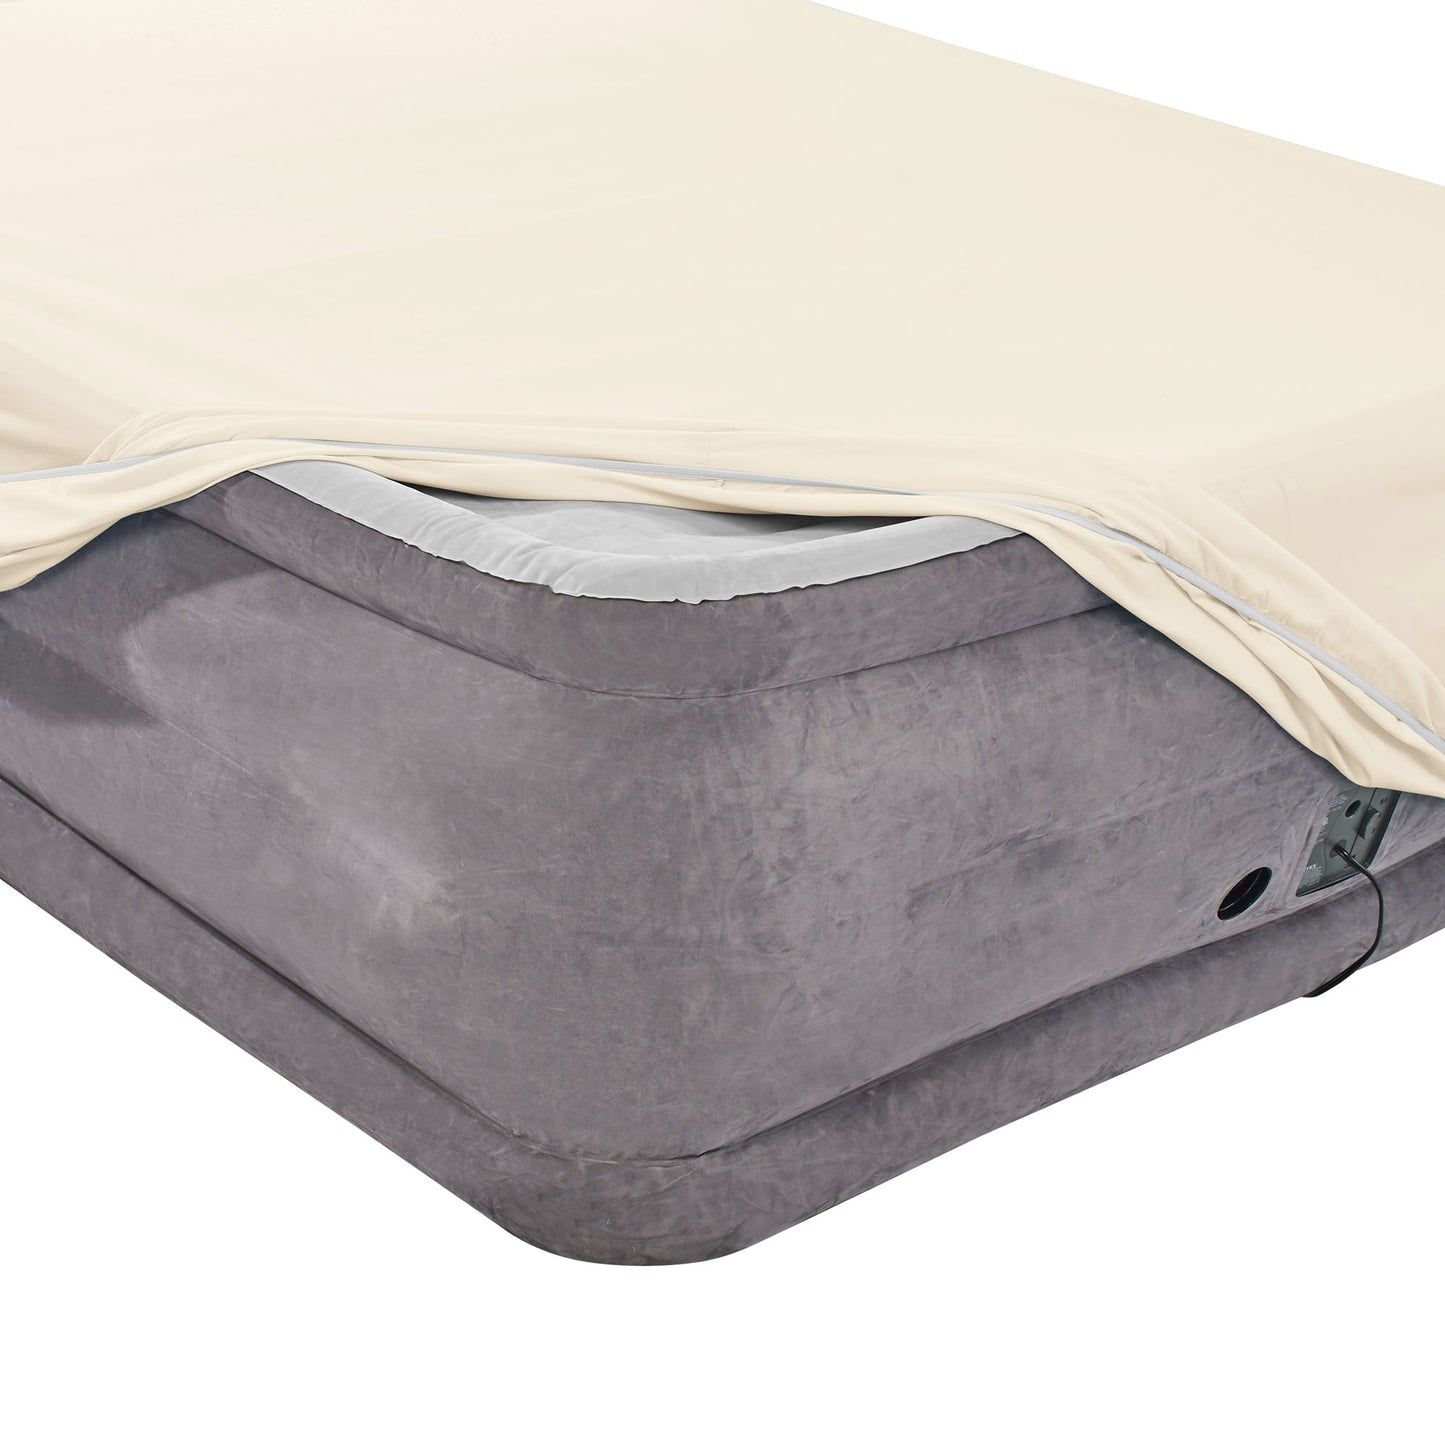 Nestl Bedding Twin Fitted Sheet - Single Fitted Deep Pocket Sheet - Fits Mattress Perfectly - Soft Wrinkle Free Sheet - 1 Fitted Sheet Only